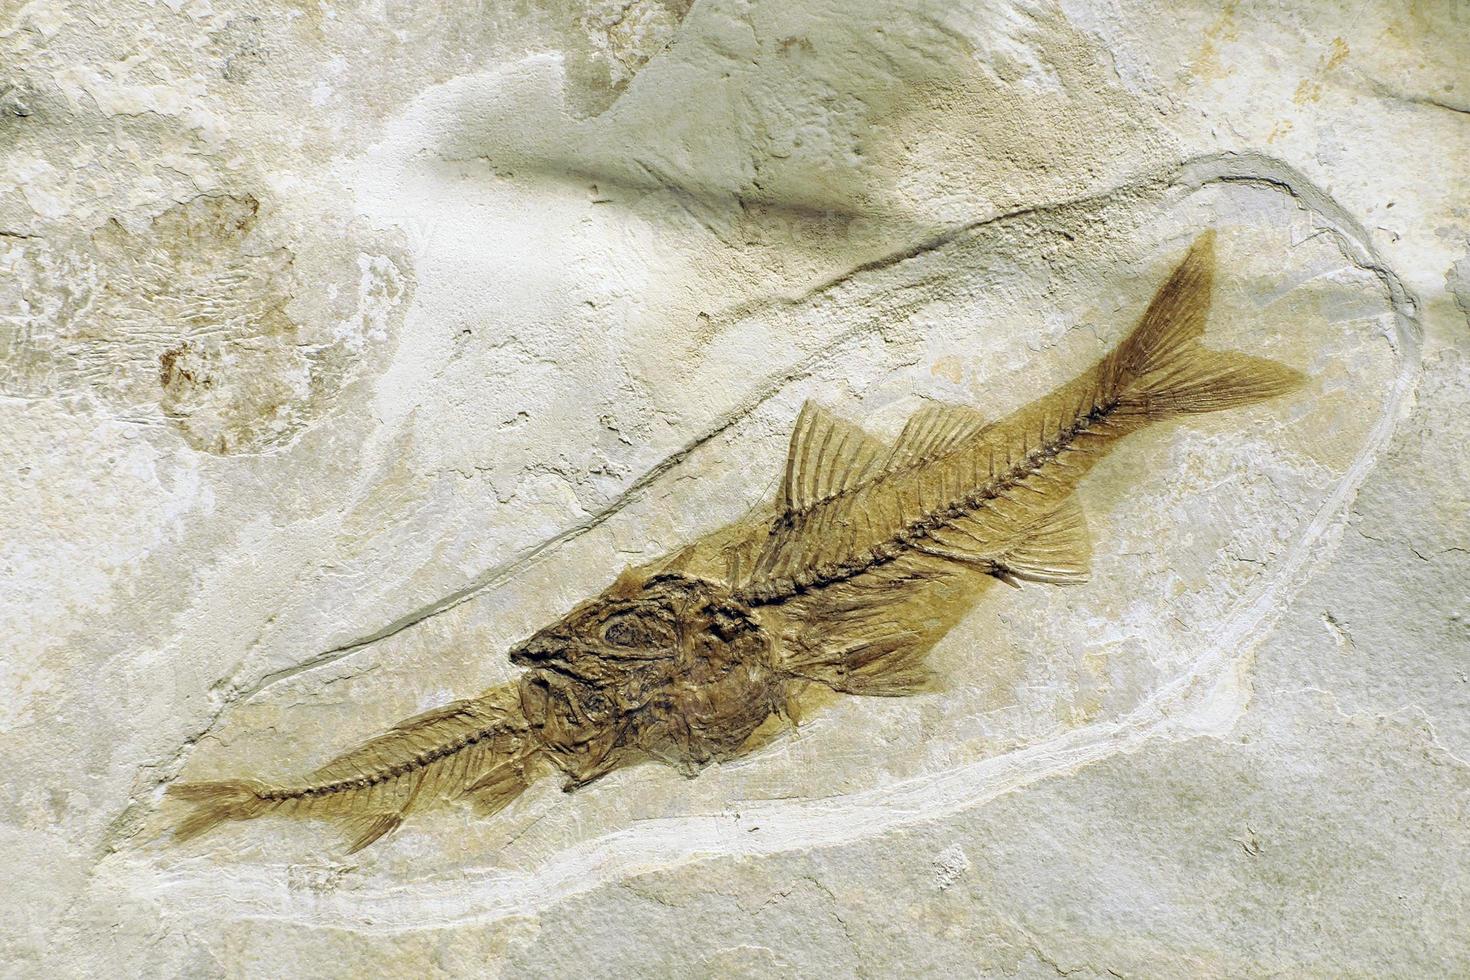 Depalis macrurus prehistoric fossilized fish eating other fish in stone photo